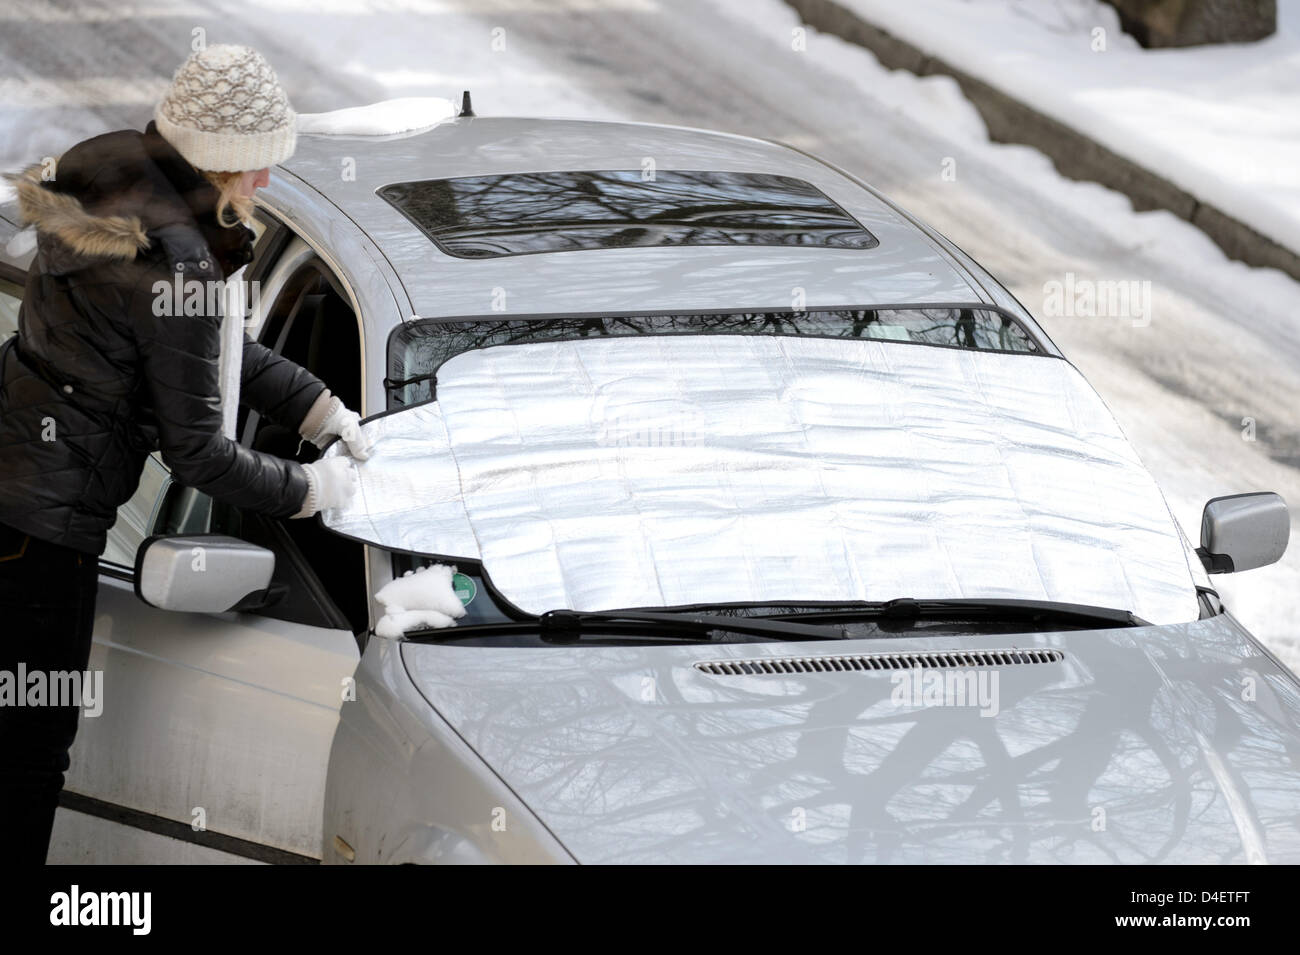 A woman places a antifreeze tarpaulin onto the windshield of a car